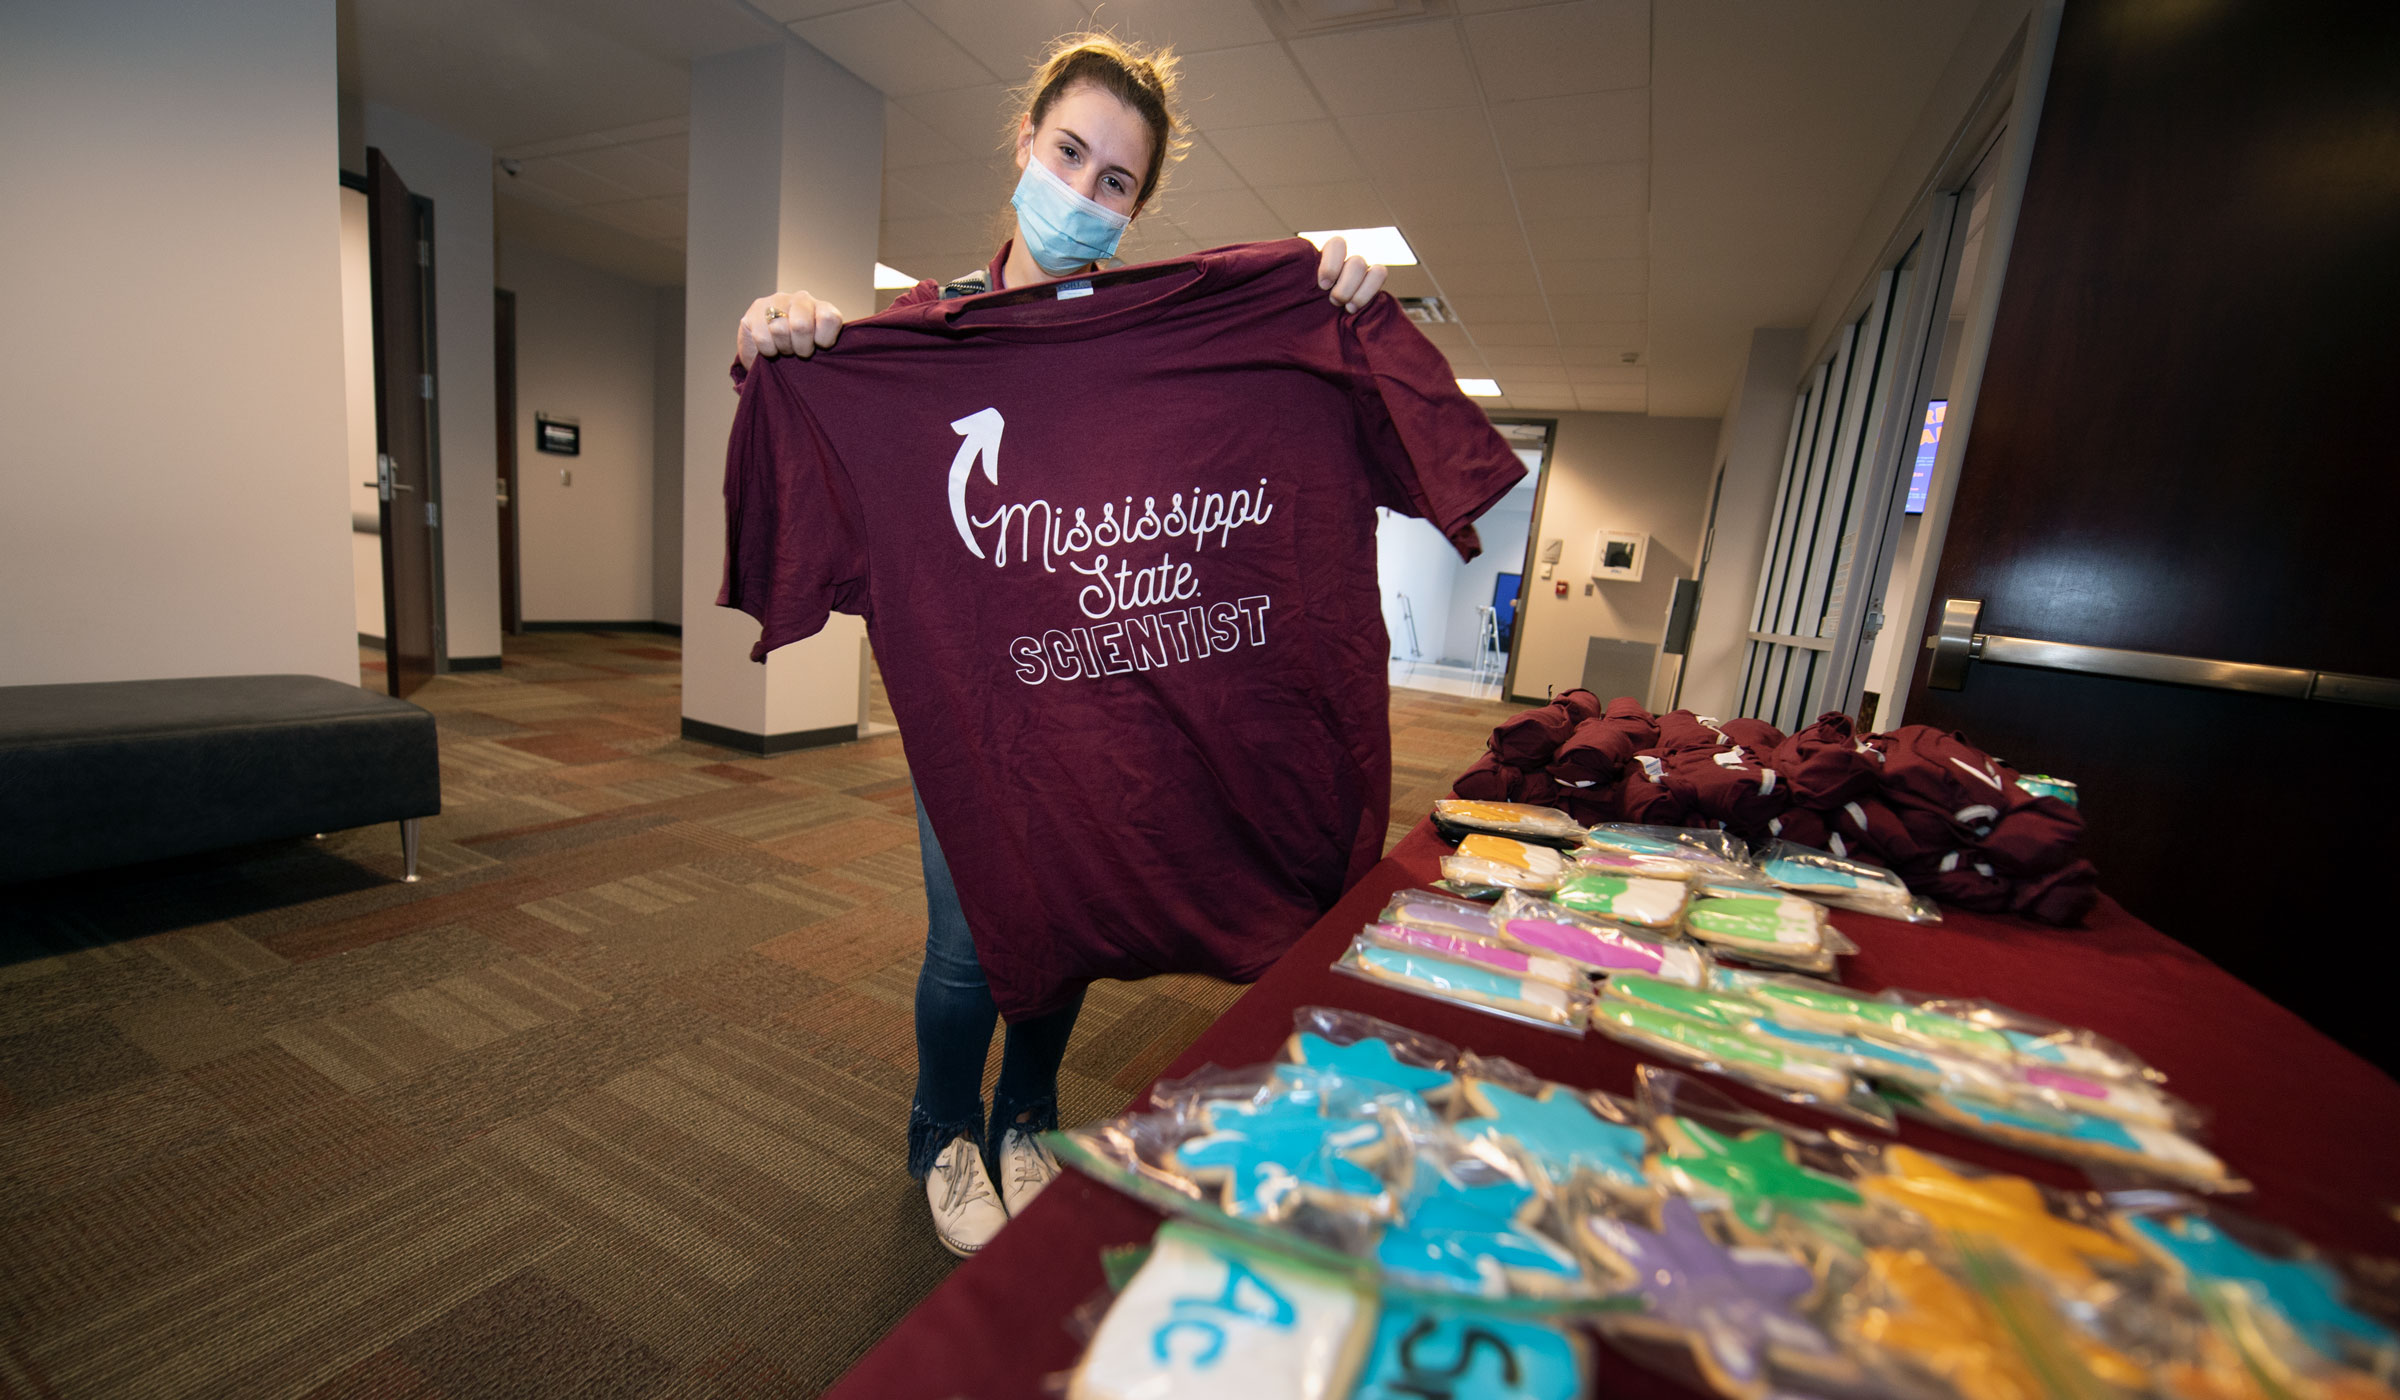 A student holds up a maroon t-shirt that says &quot;Mississippi State Scientist&quot;, with science themed cookies on the table.